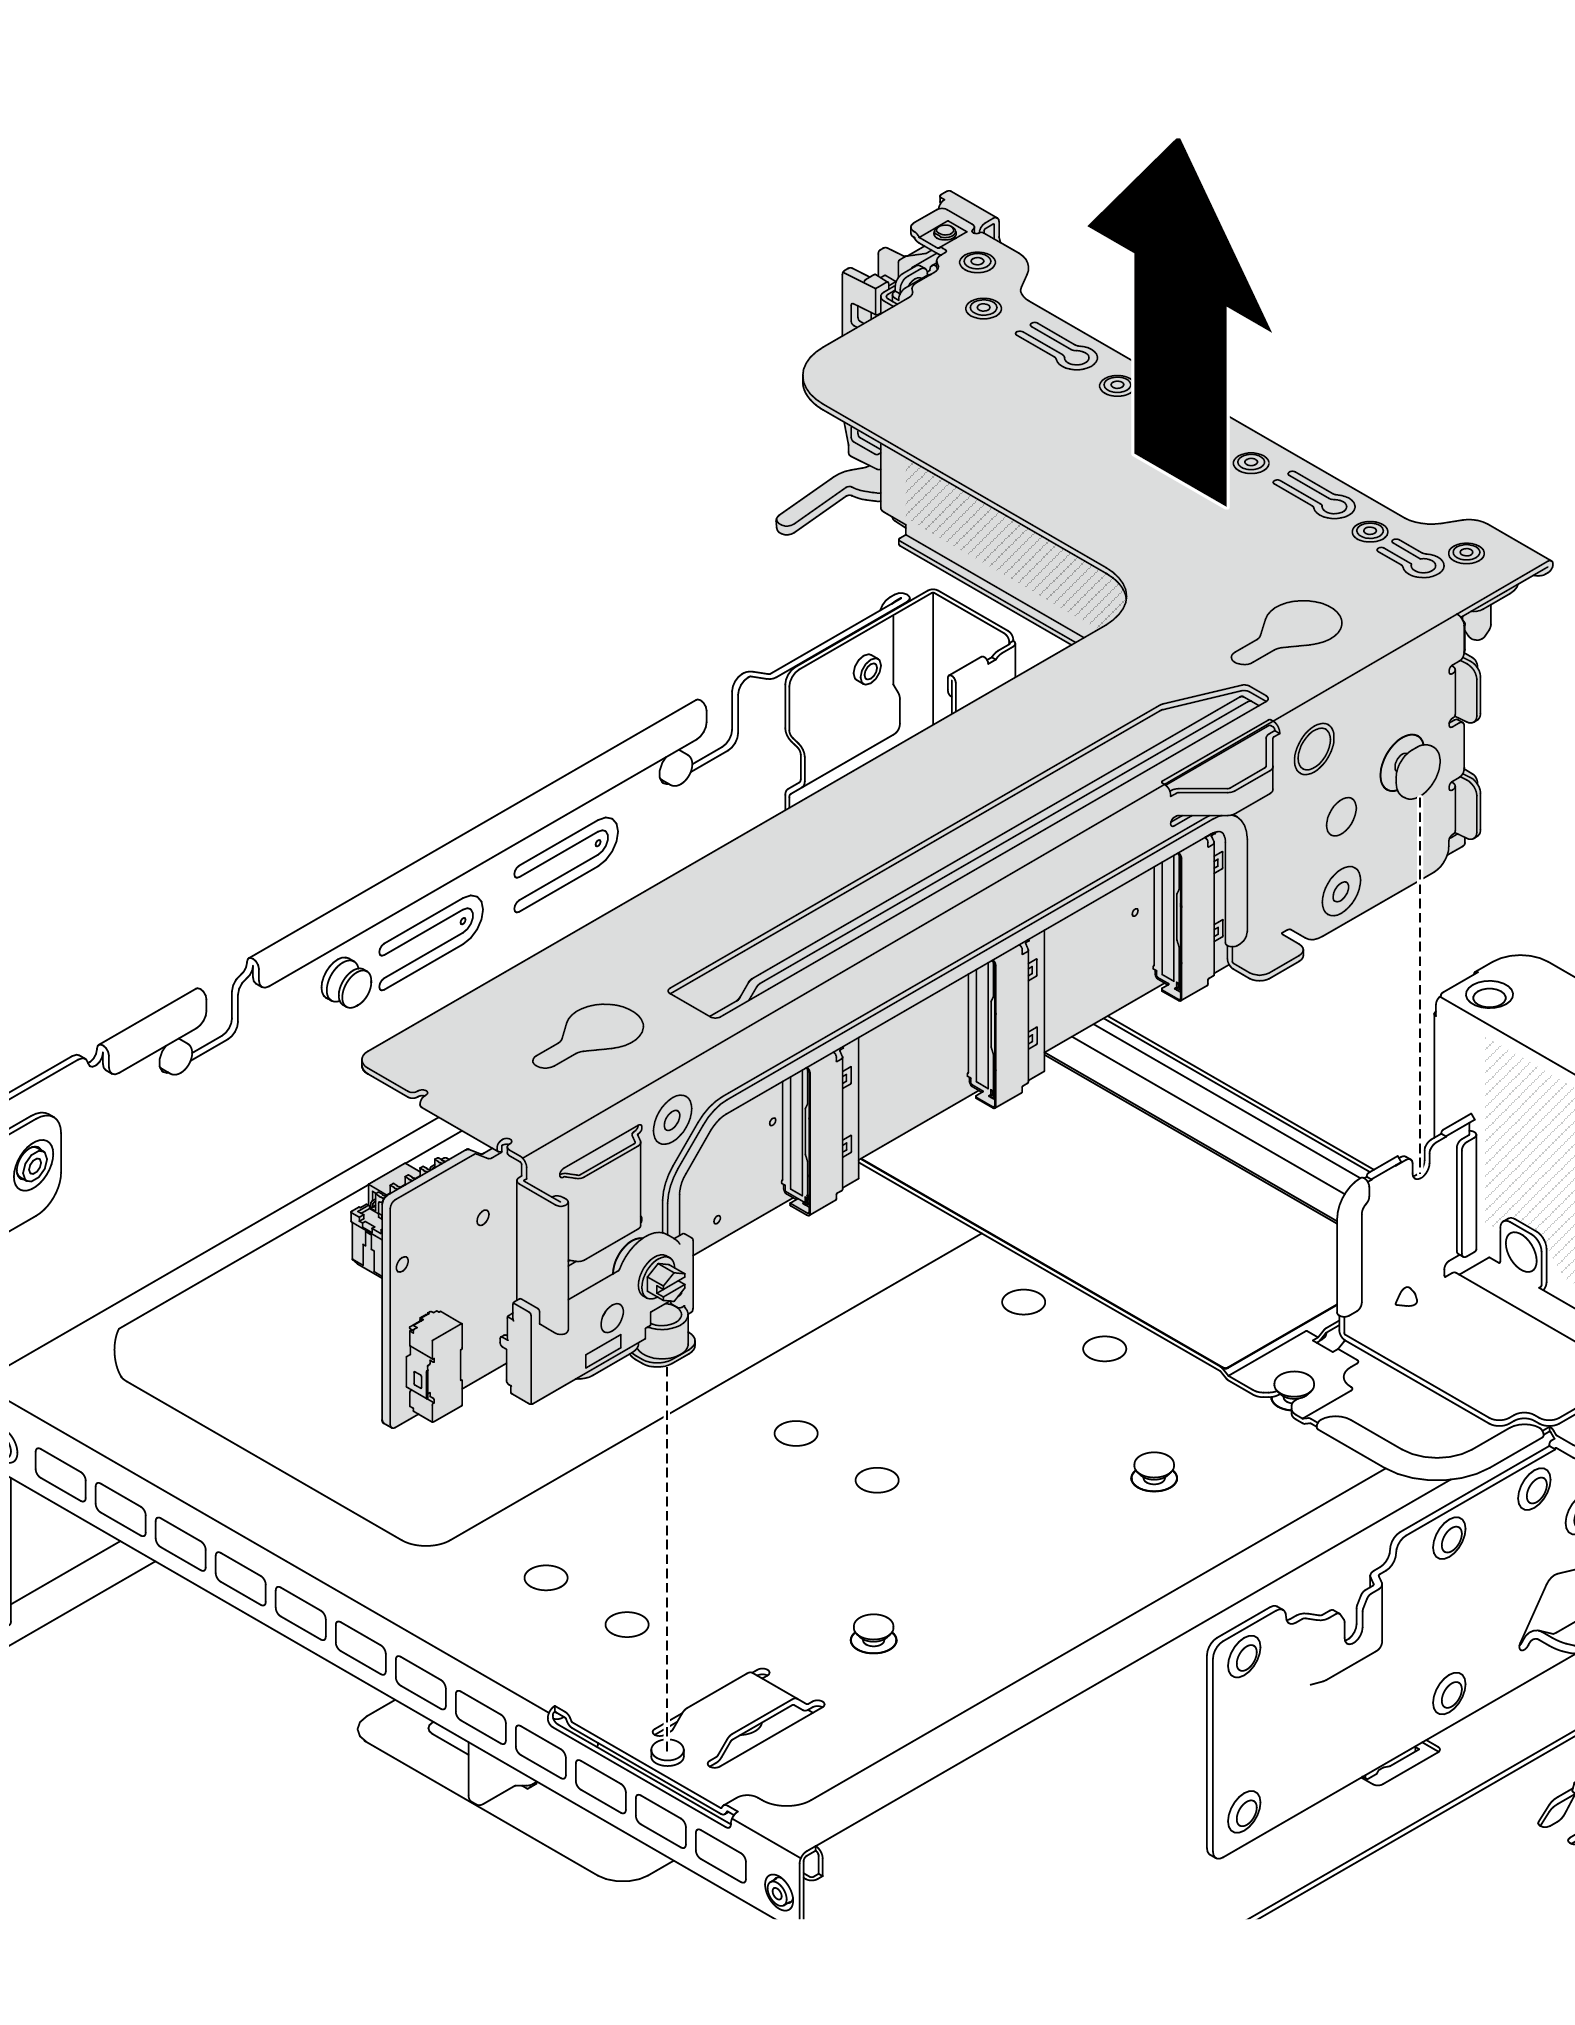 Removing the riser 3 assembly